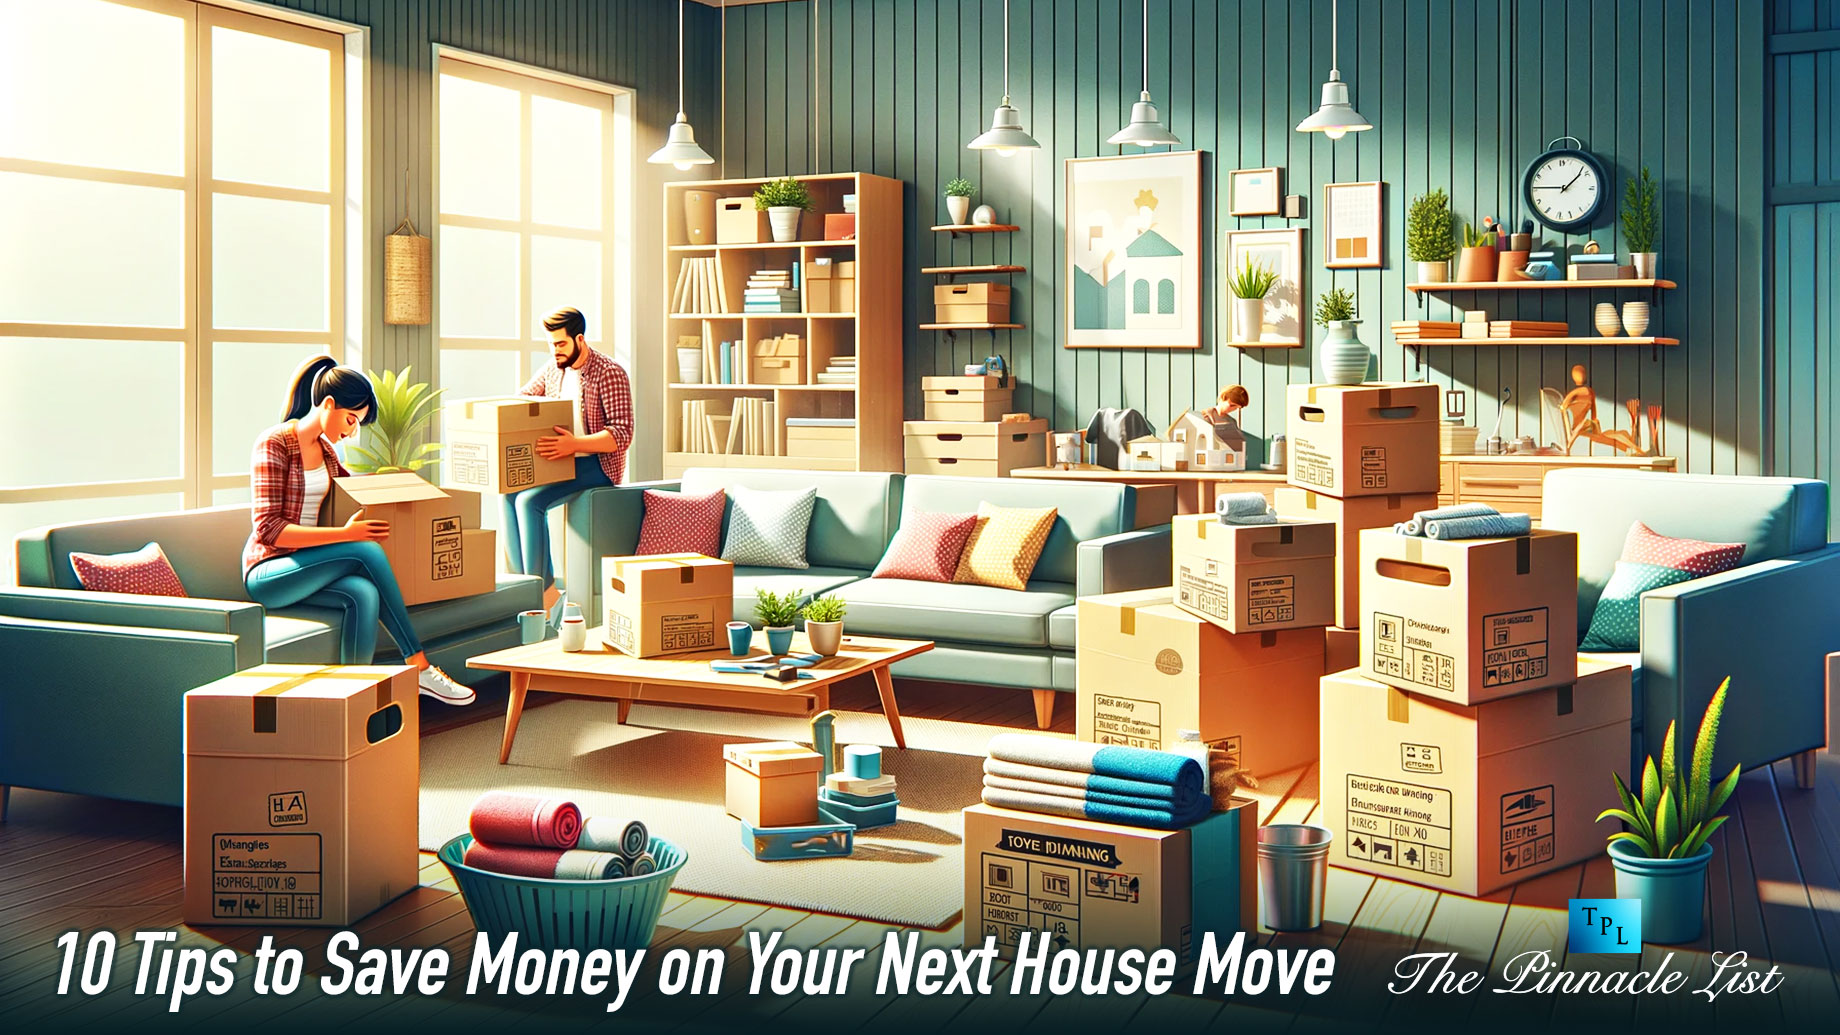 10 Tips to Save Money on Your Next House Move